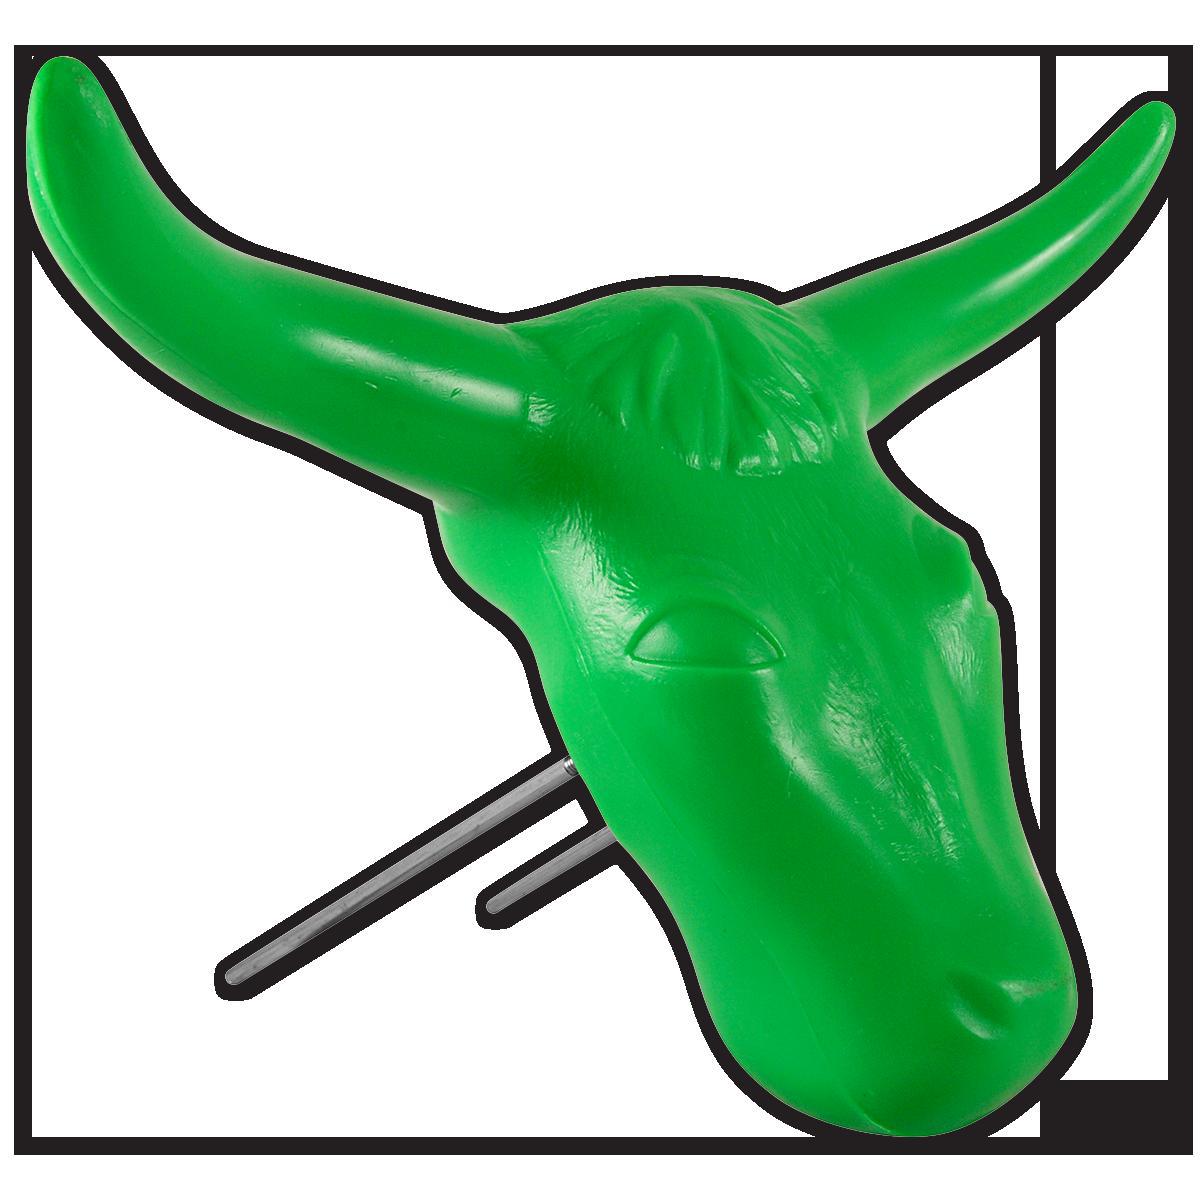 Classic Equine Steer Head - West 20 Saddle Co.